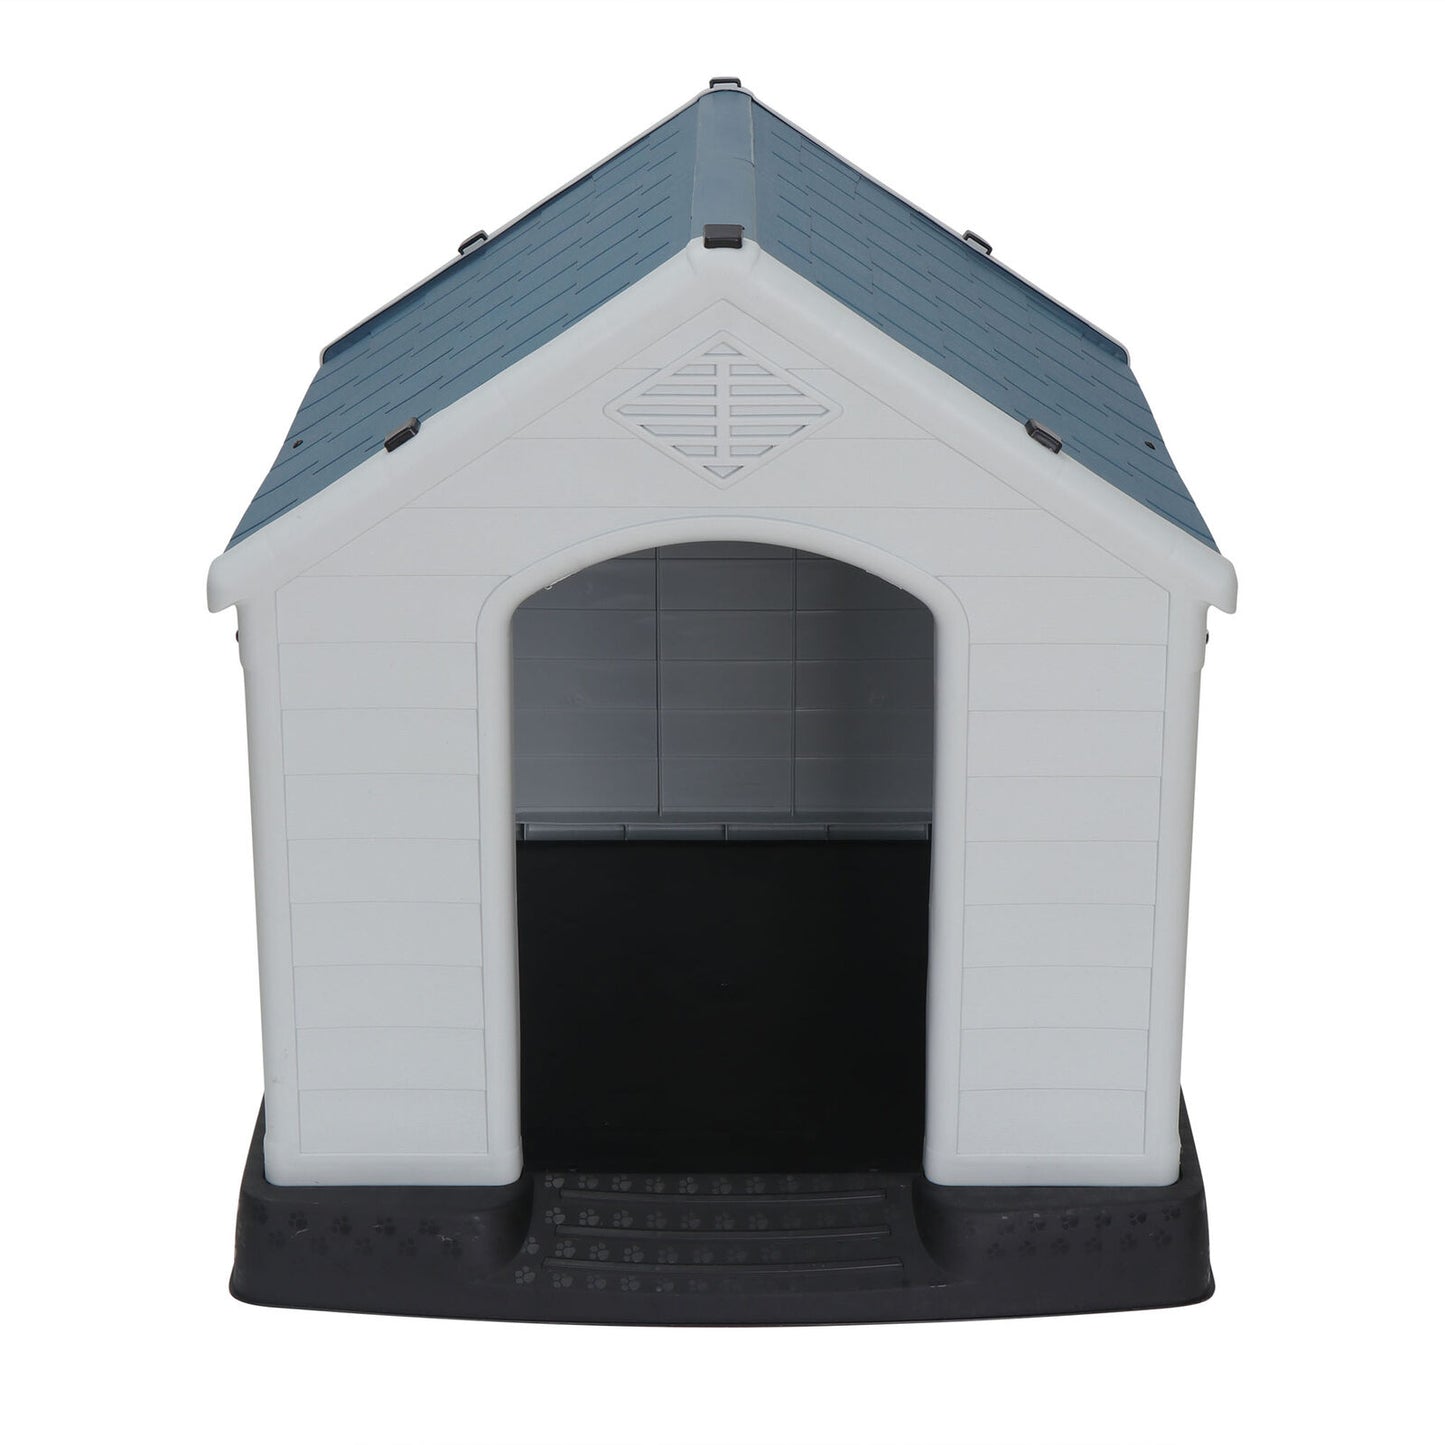 All-Weather Design Dog House Shelter Easy to Assemble Perfect for Backyards